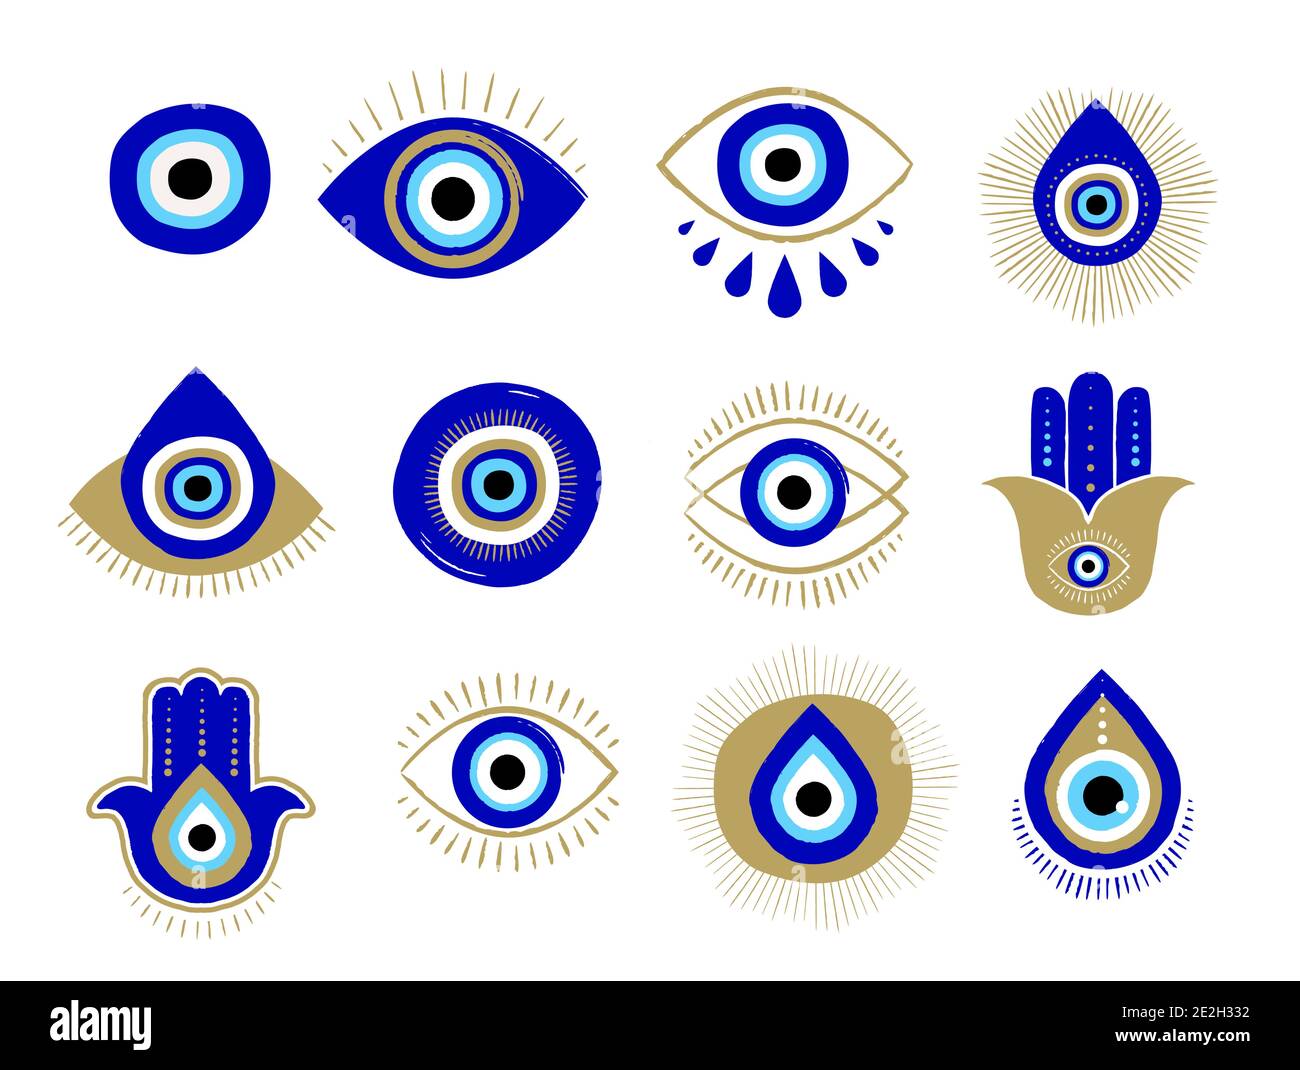 Evil eye or Turkish eye symbols and icons set. Modern amulet design and home decor idea Stock Vector